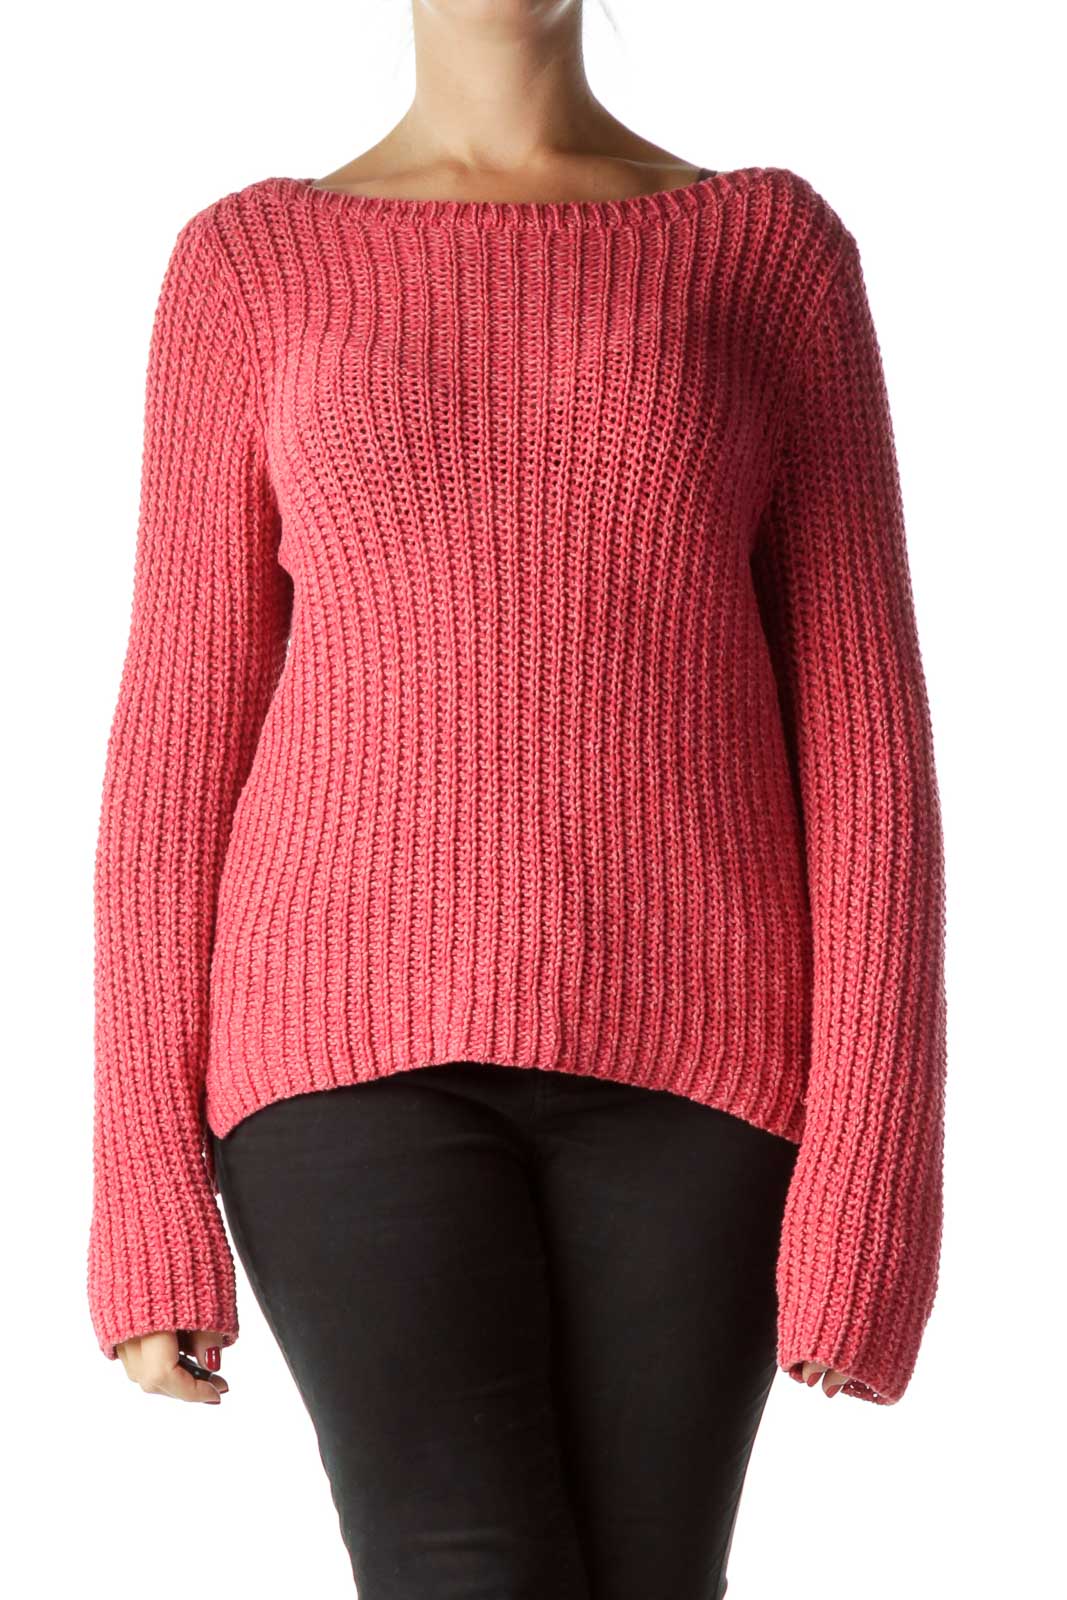 Pink Cable Knit Rund Neck Sweater Front